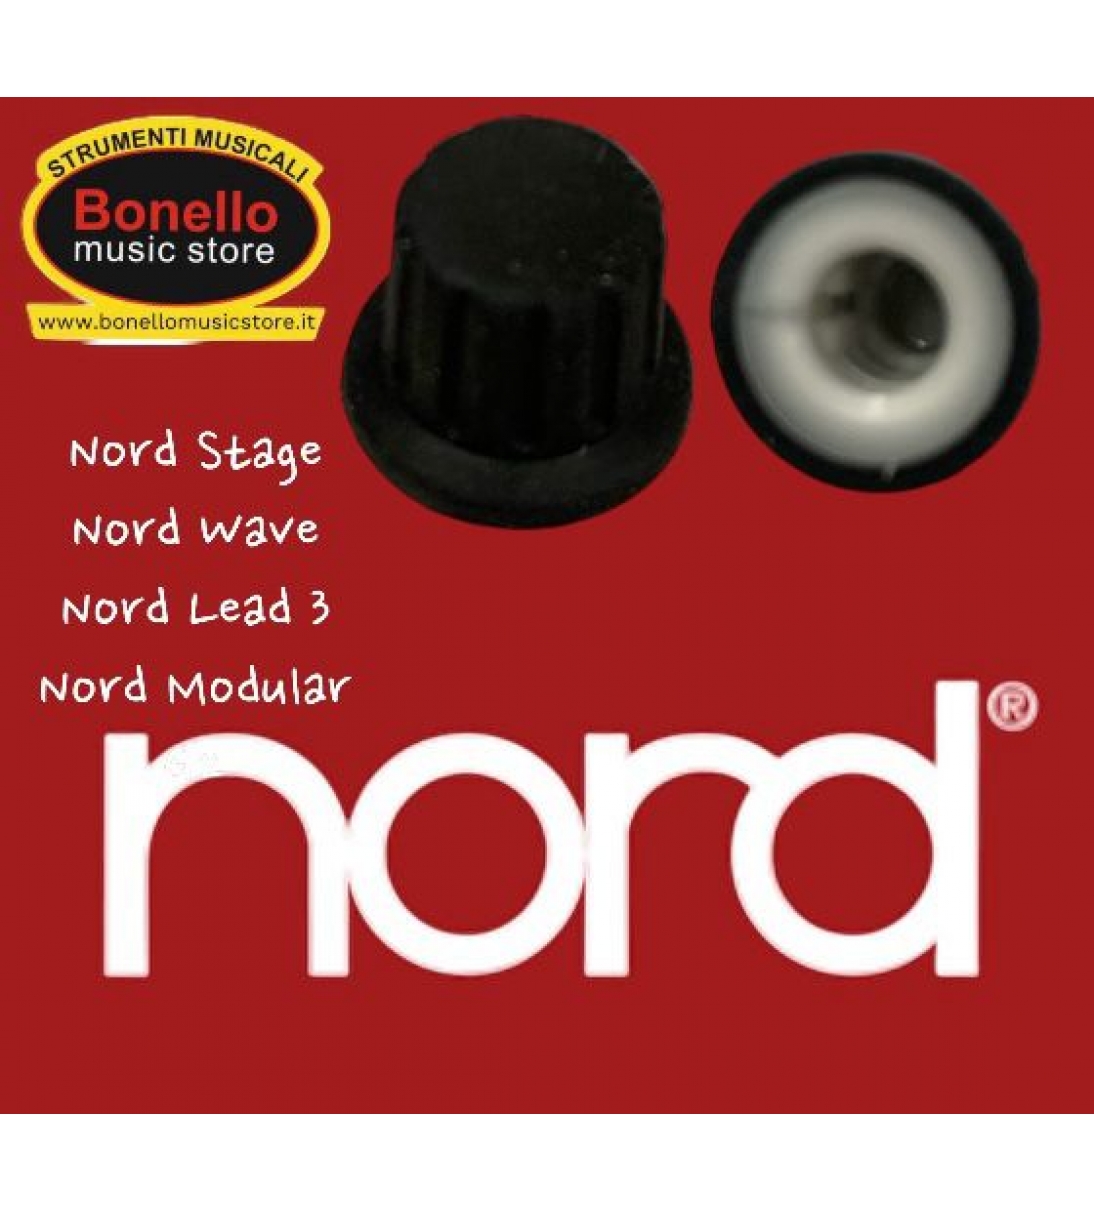 Knob encoder per Nord Stage, Nord Wave, Nord Lead 3, Nord Modular G2